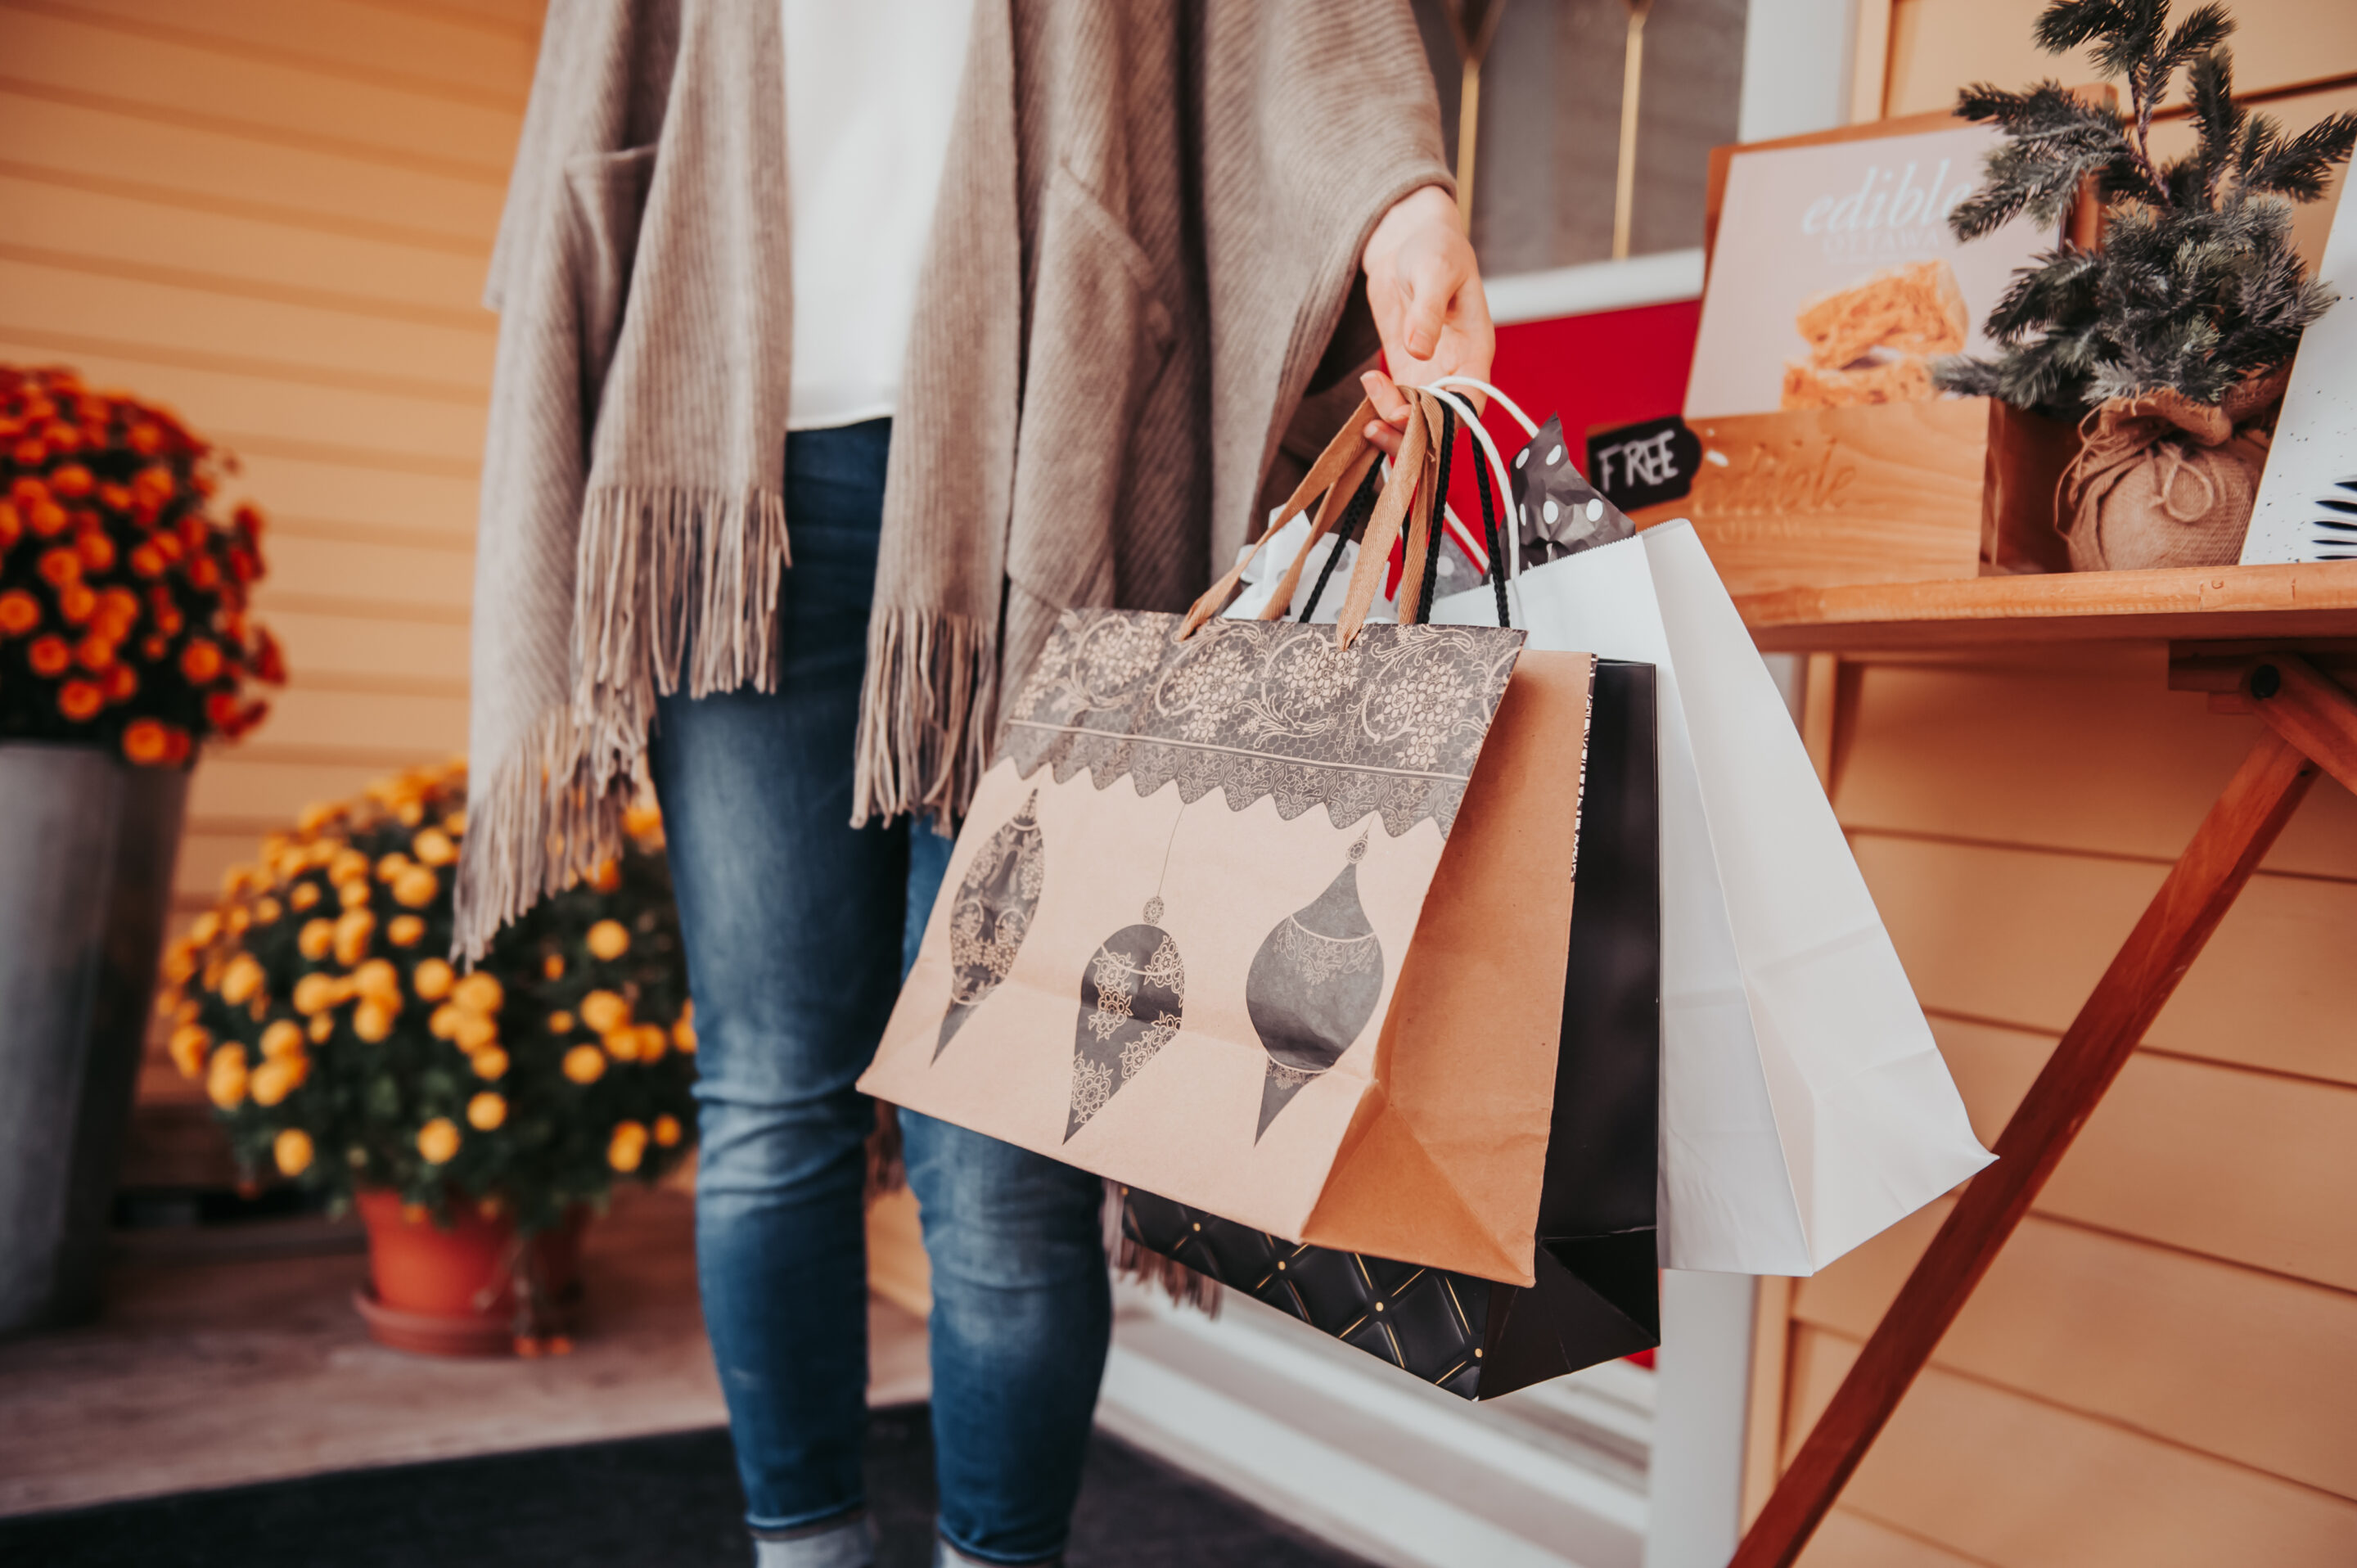 A LOCAL CHRISTMAS SHOPPING GUIDE FOR CHRISTMAS IN THE COUNTIES